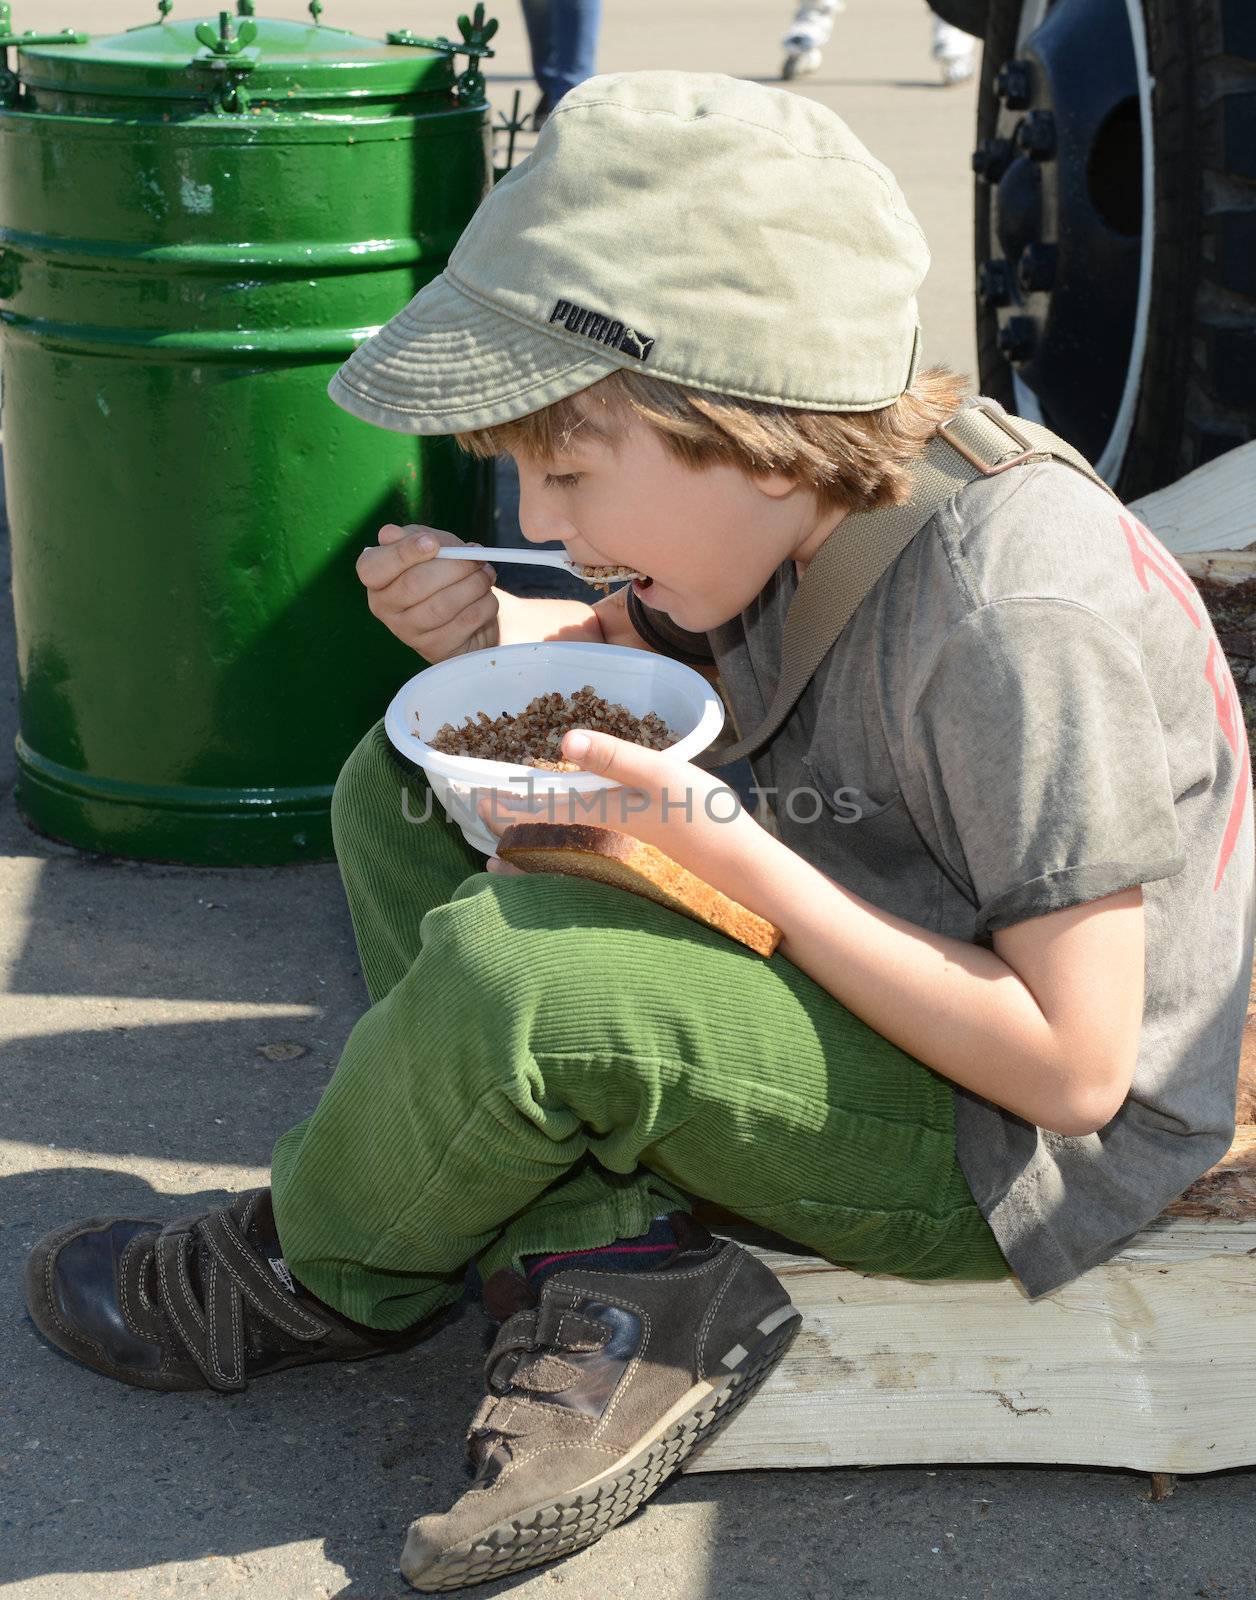  Moscow, Russia - May 9, 2013: Boy eating porridge soldier in the military field kitchen during festivities devoted to 68th anniversary of Victory Day